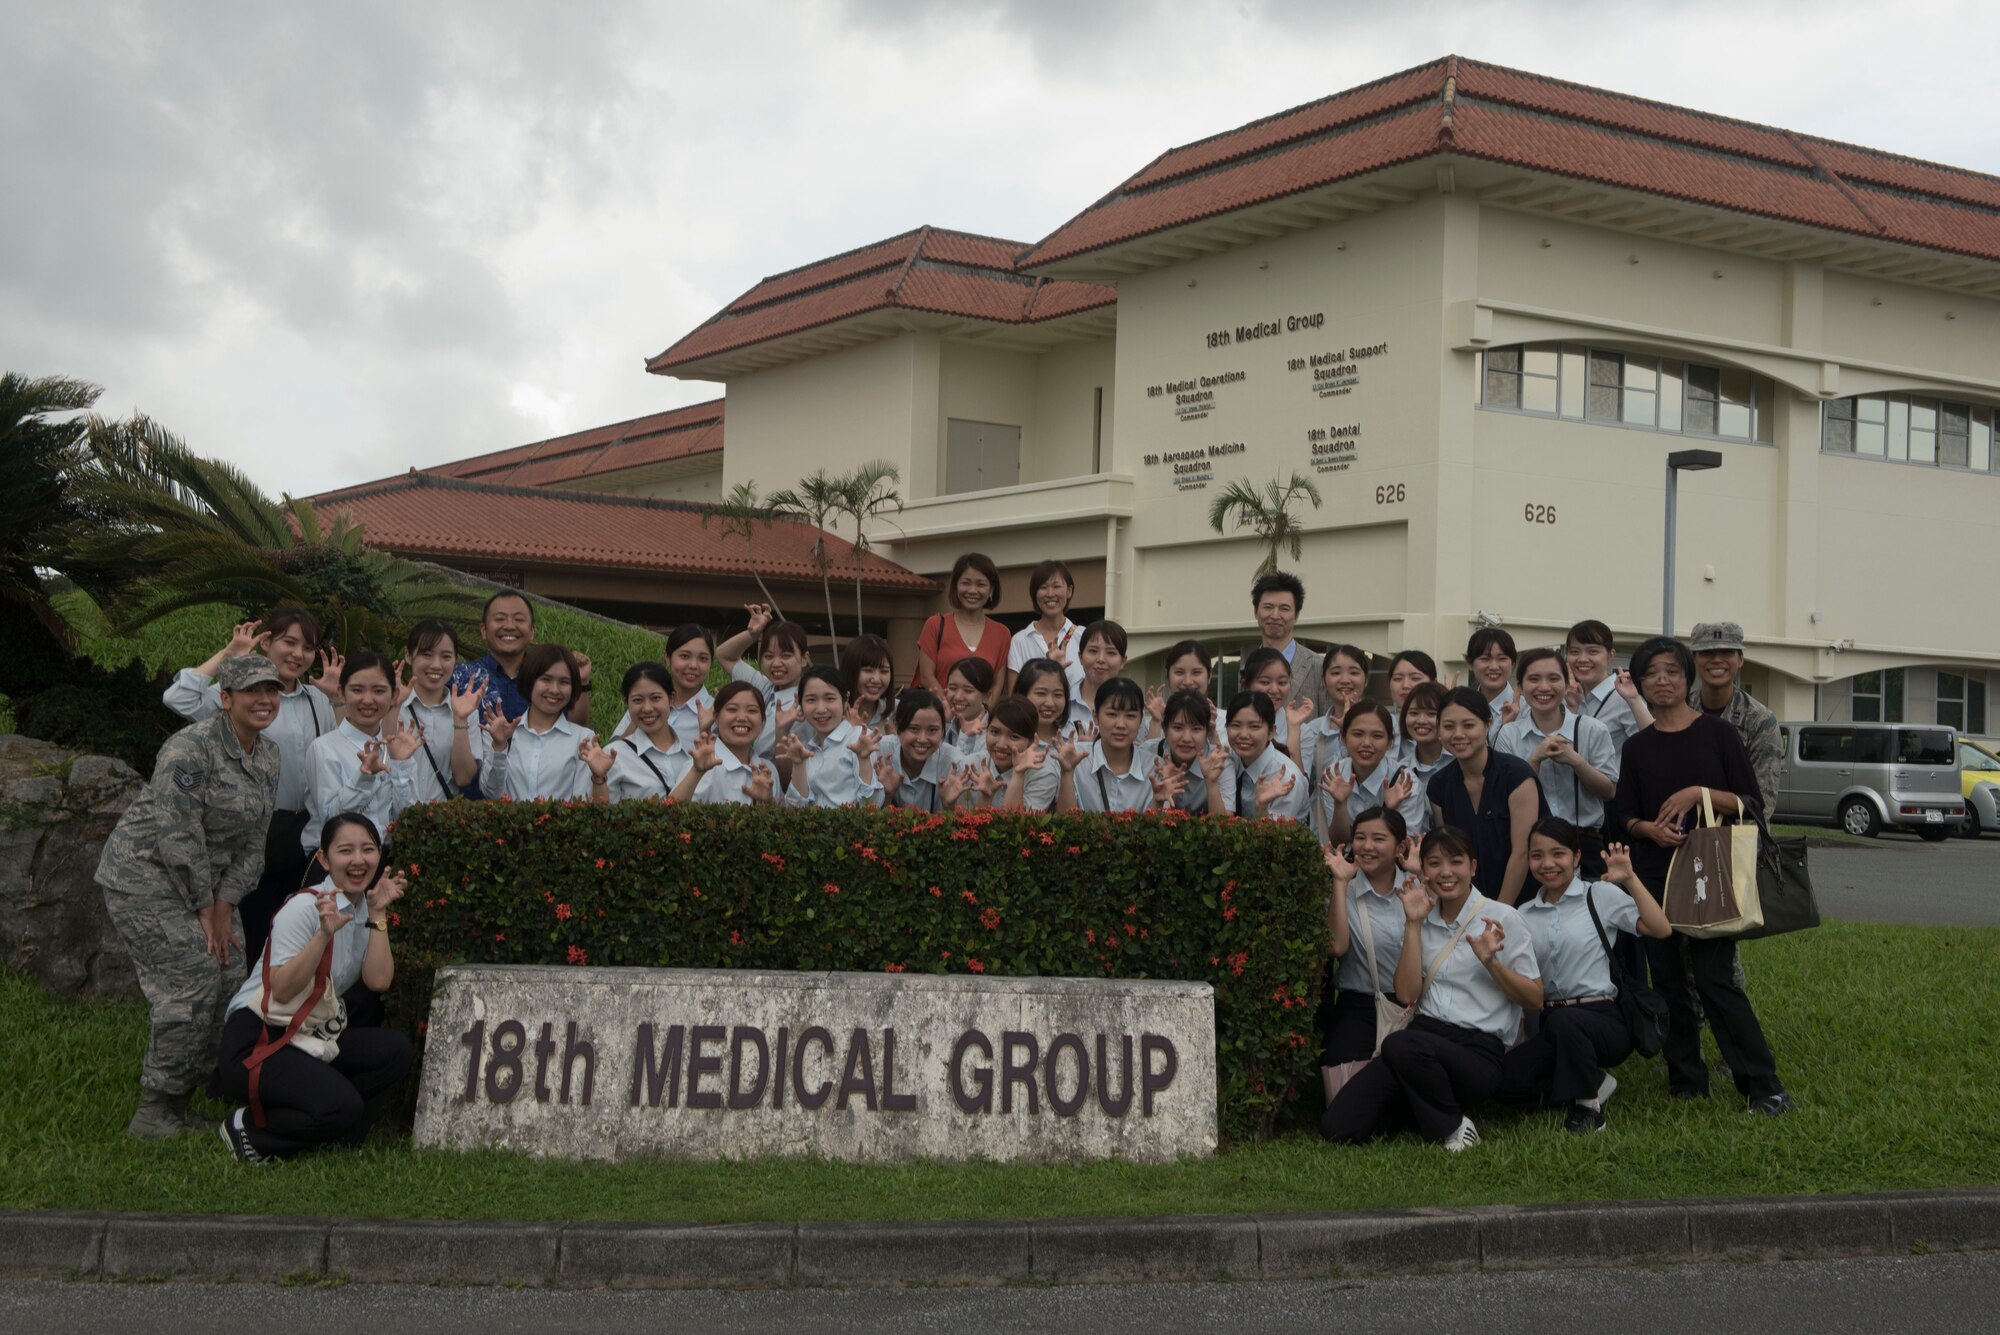 The White Dental Clinic students pose for a group picture in front of the 18th Medical Group building on Aug. 16, 2019.